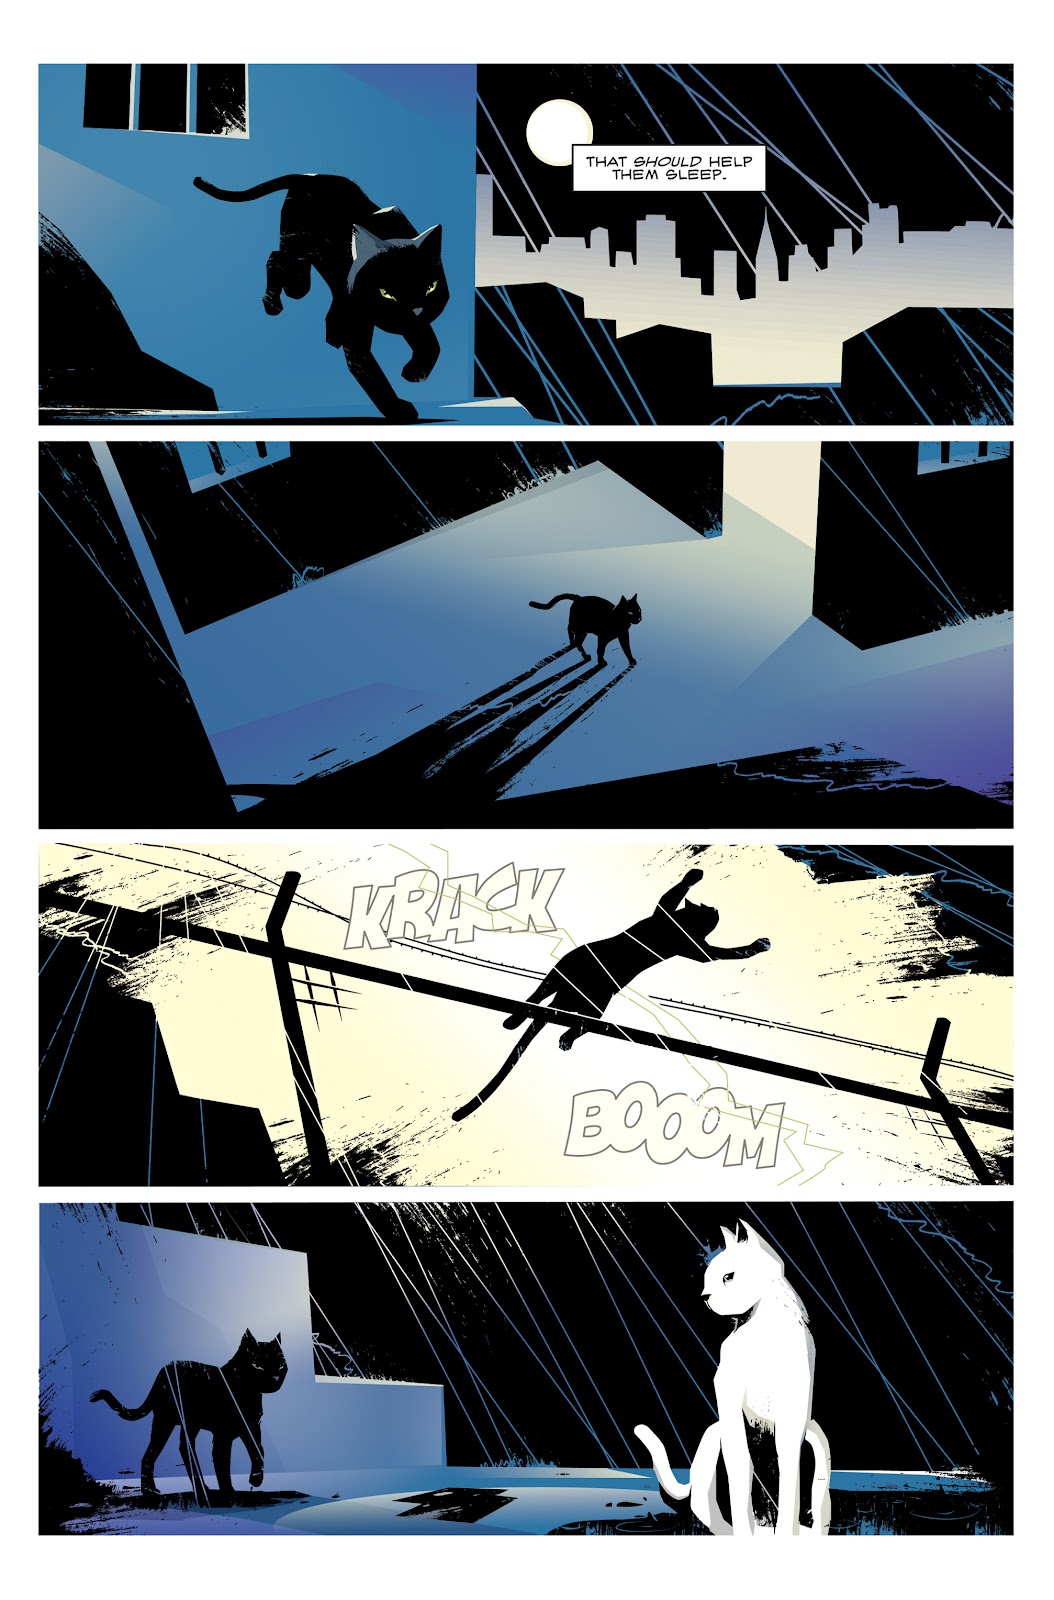 Hero Cats: Midnight Over Stellar City Vol. 2 issue 1 - Page 5